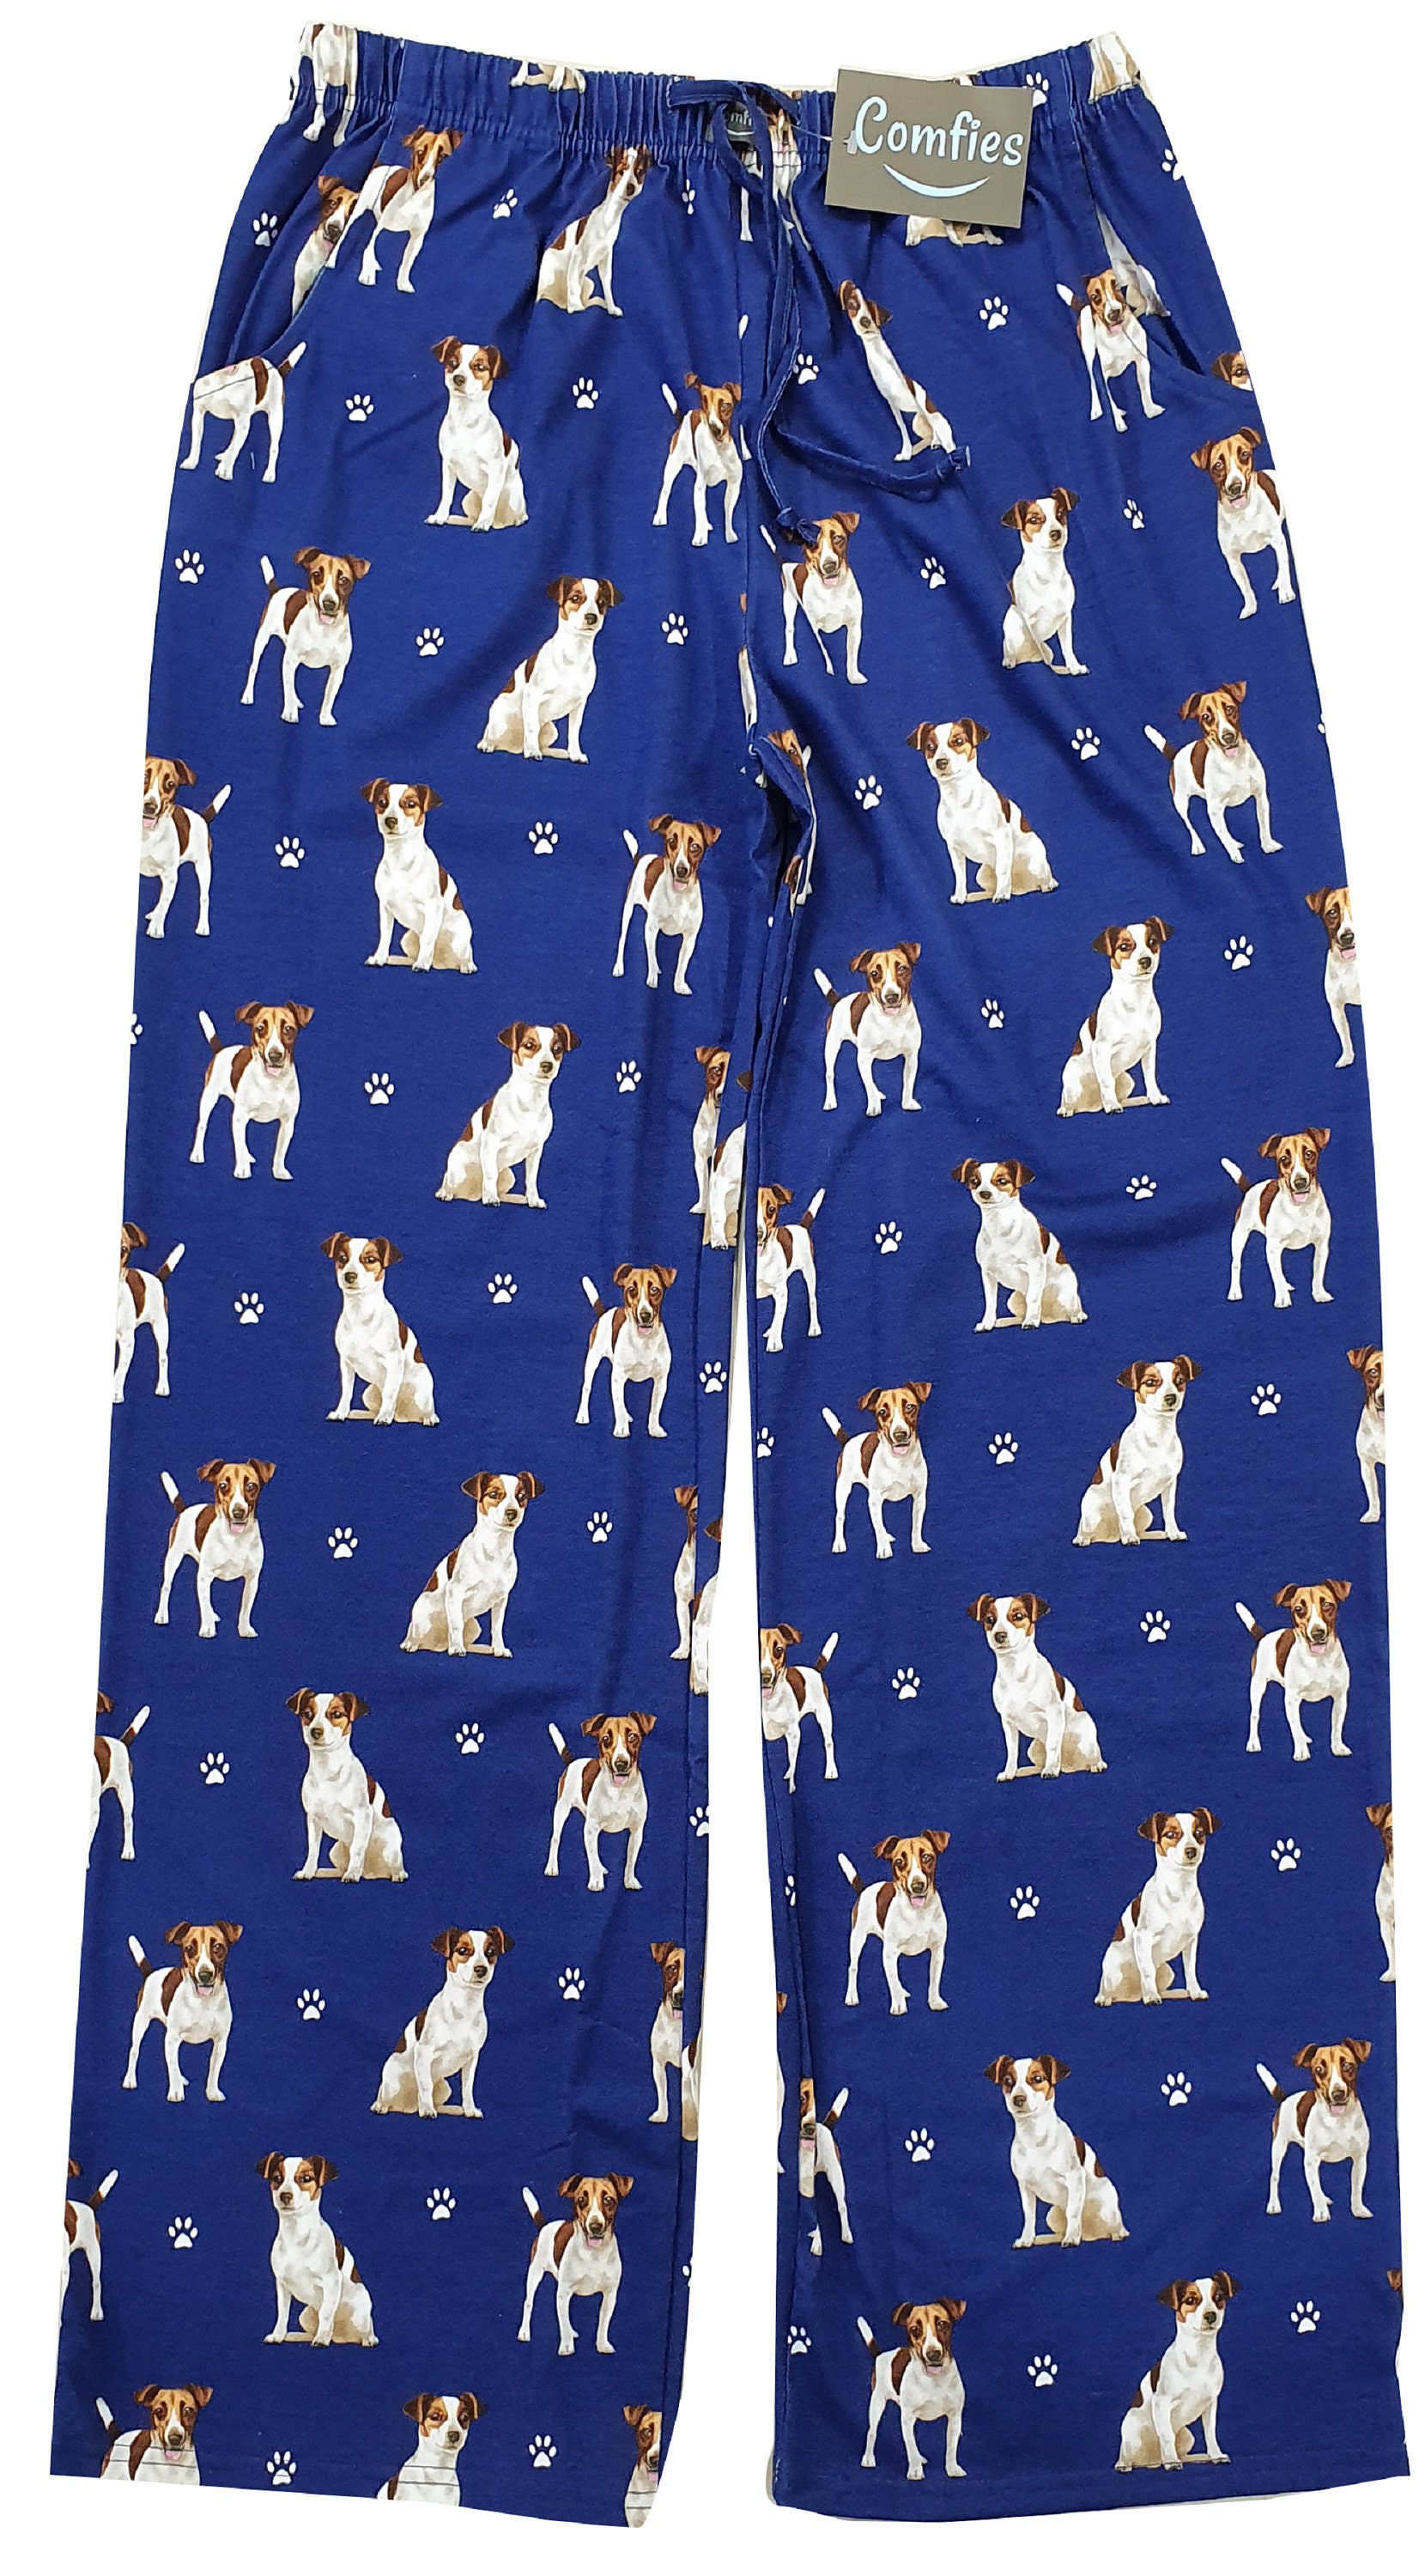 Jack Russell Unisex Cotton Blend Pajama Bottoms - Super Soft & Comfortable Perfect For Gifts